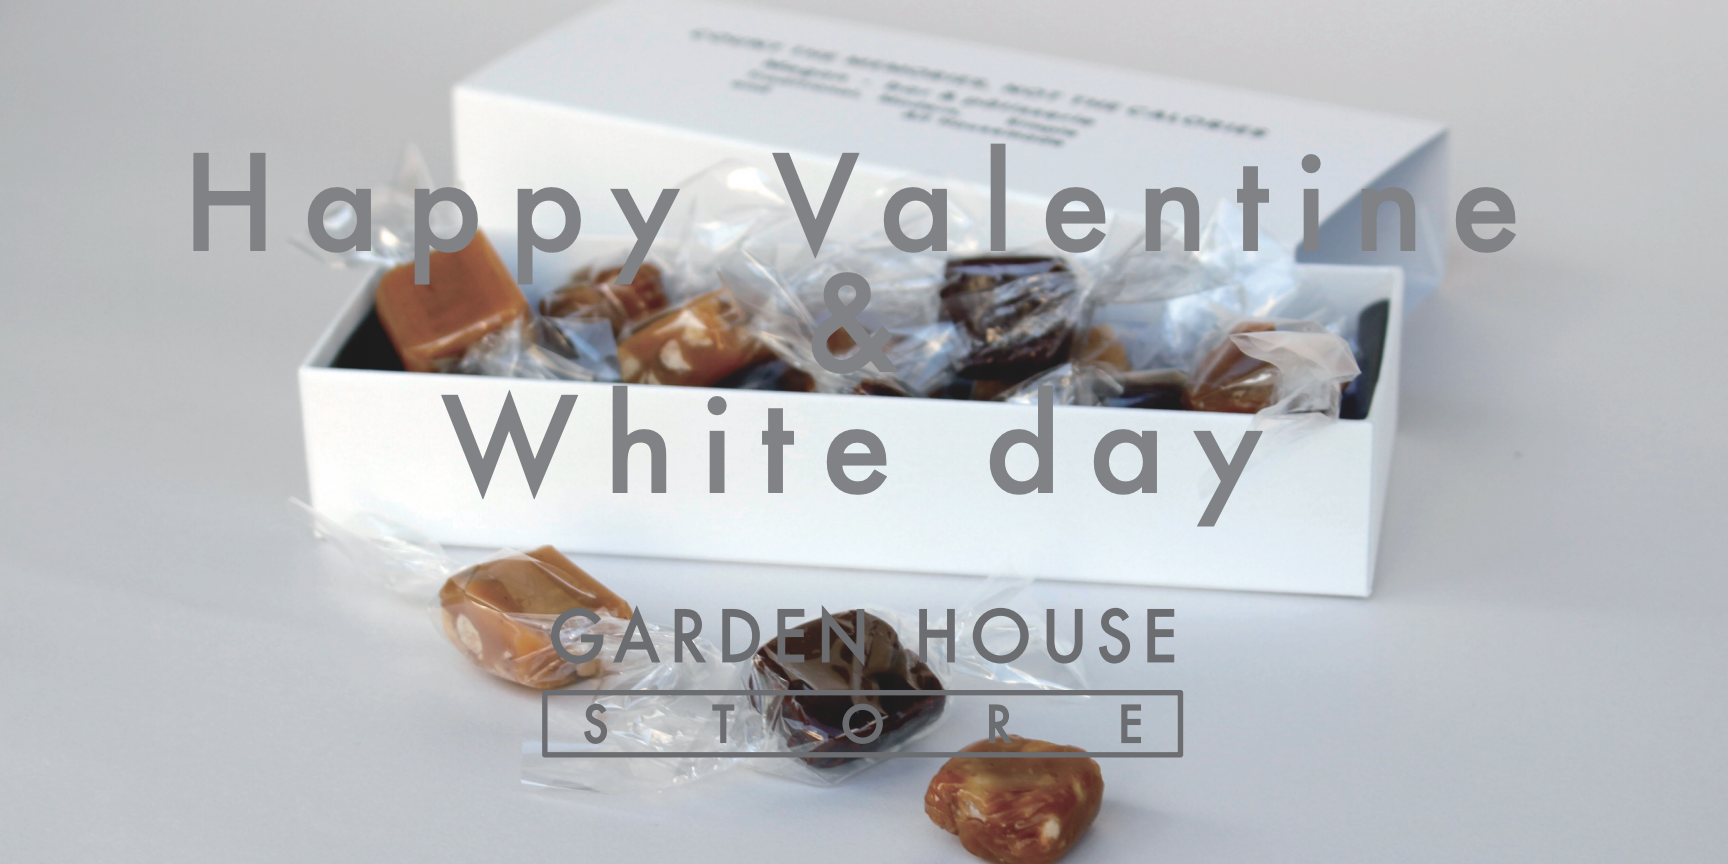 GARDEN HOUSE CIAL横浜店、Happy White dayフェア開催中